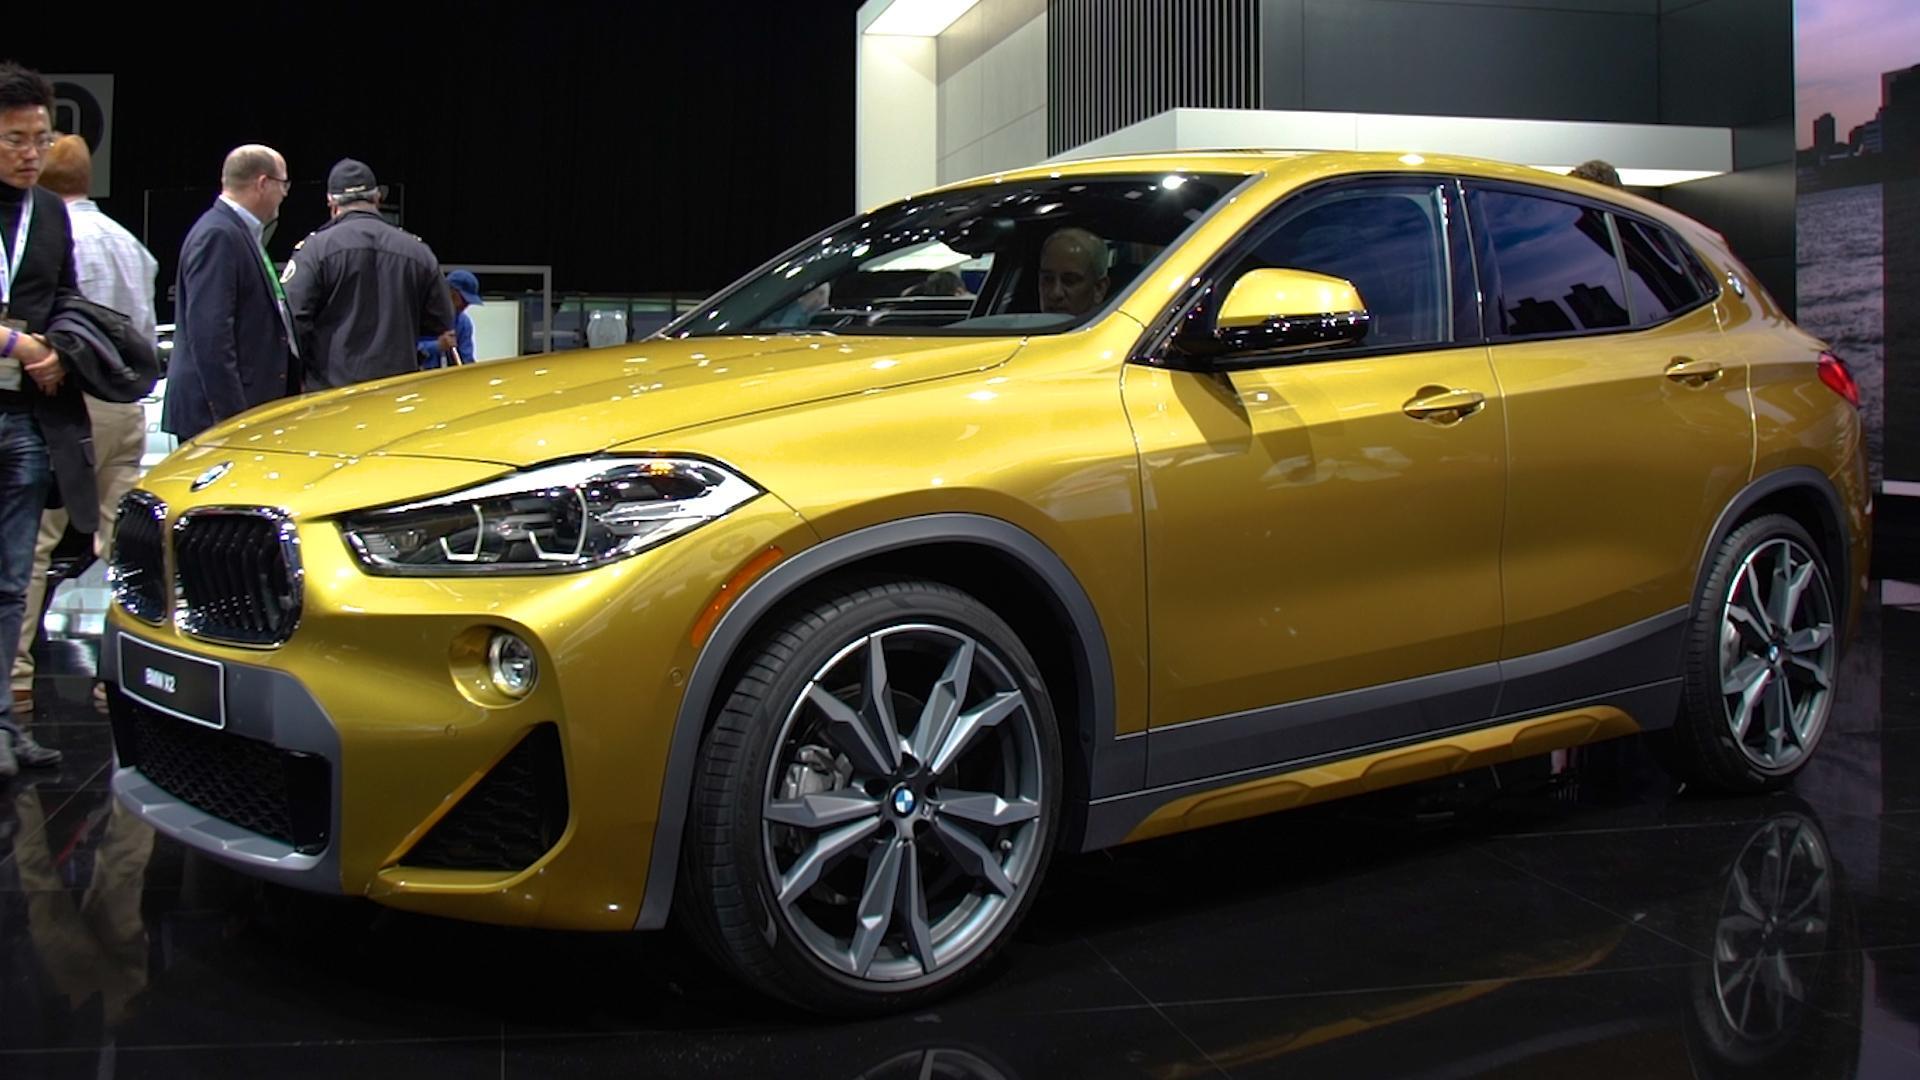 2018 BMW X2 is Smaller, Sportier Take on X1 SUV - Consumer Reports